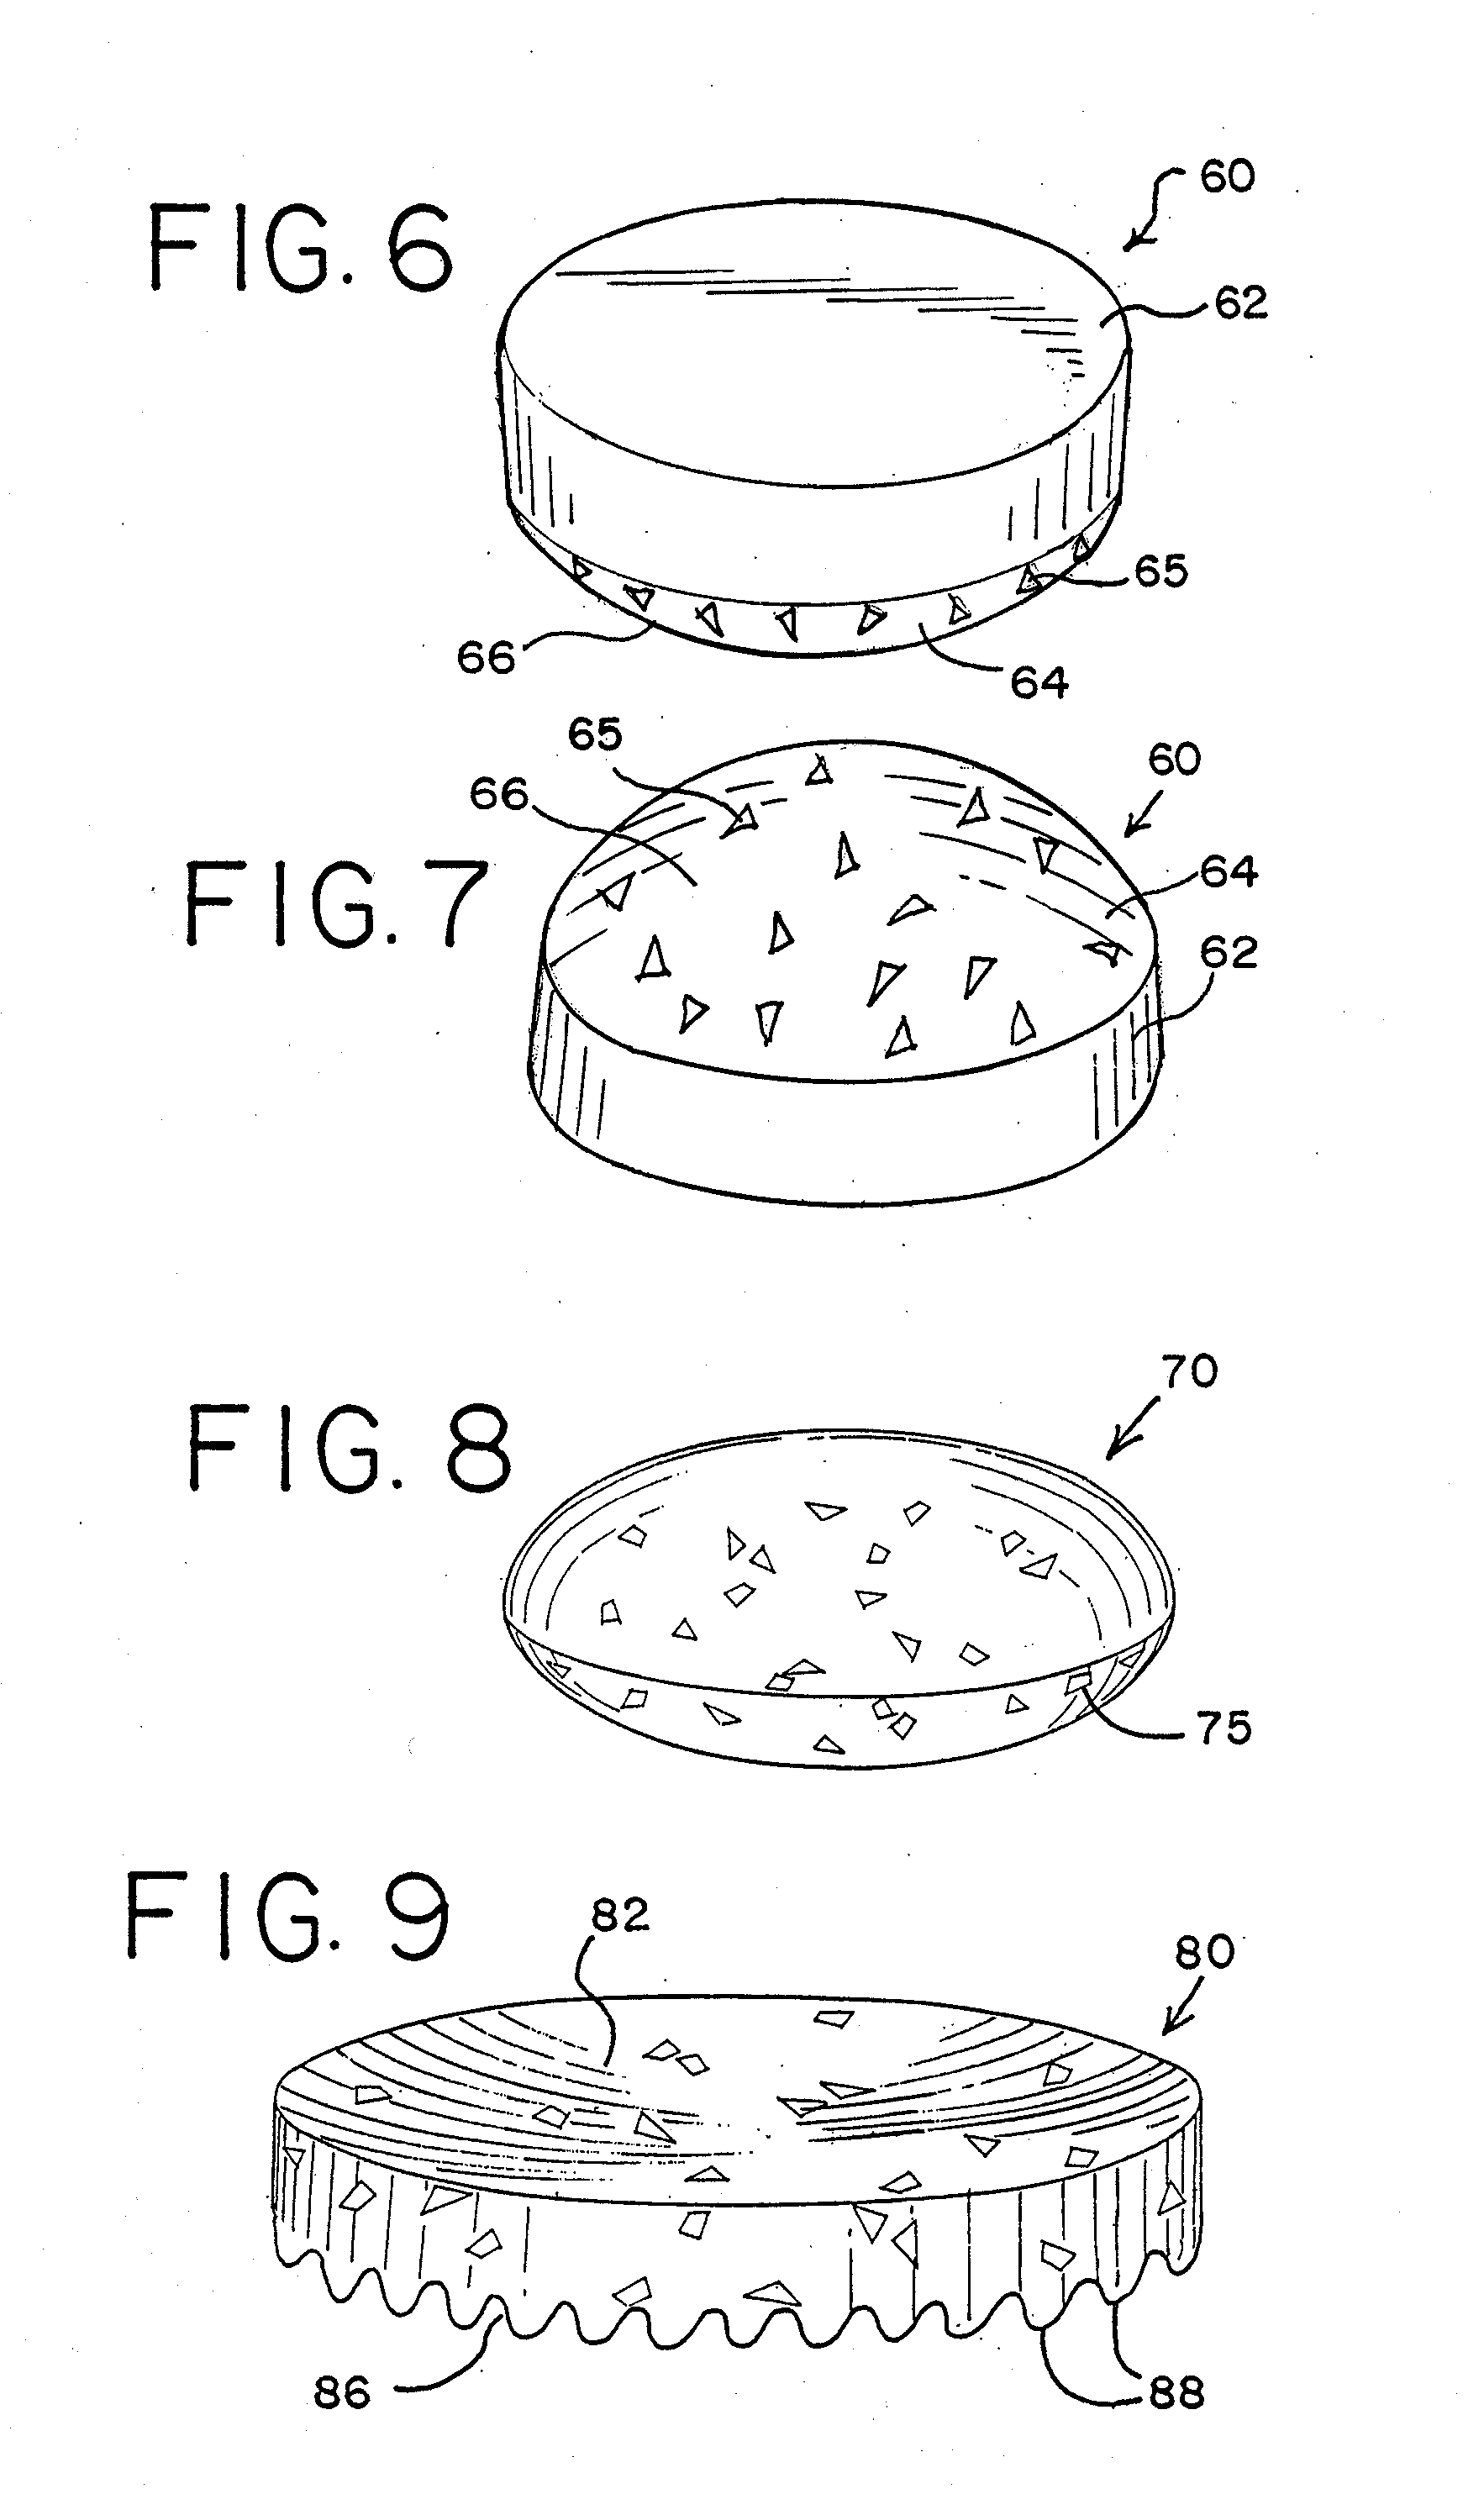 Breath freshening confectionery products and methods of making and using same